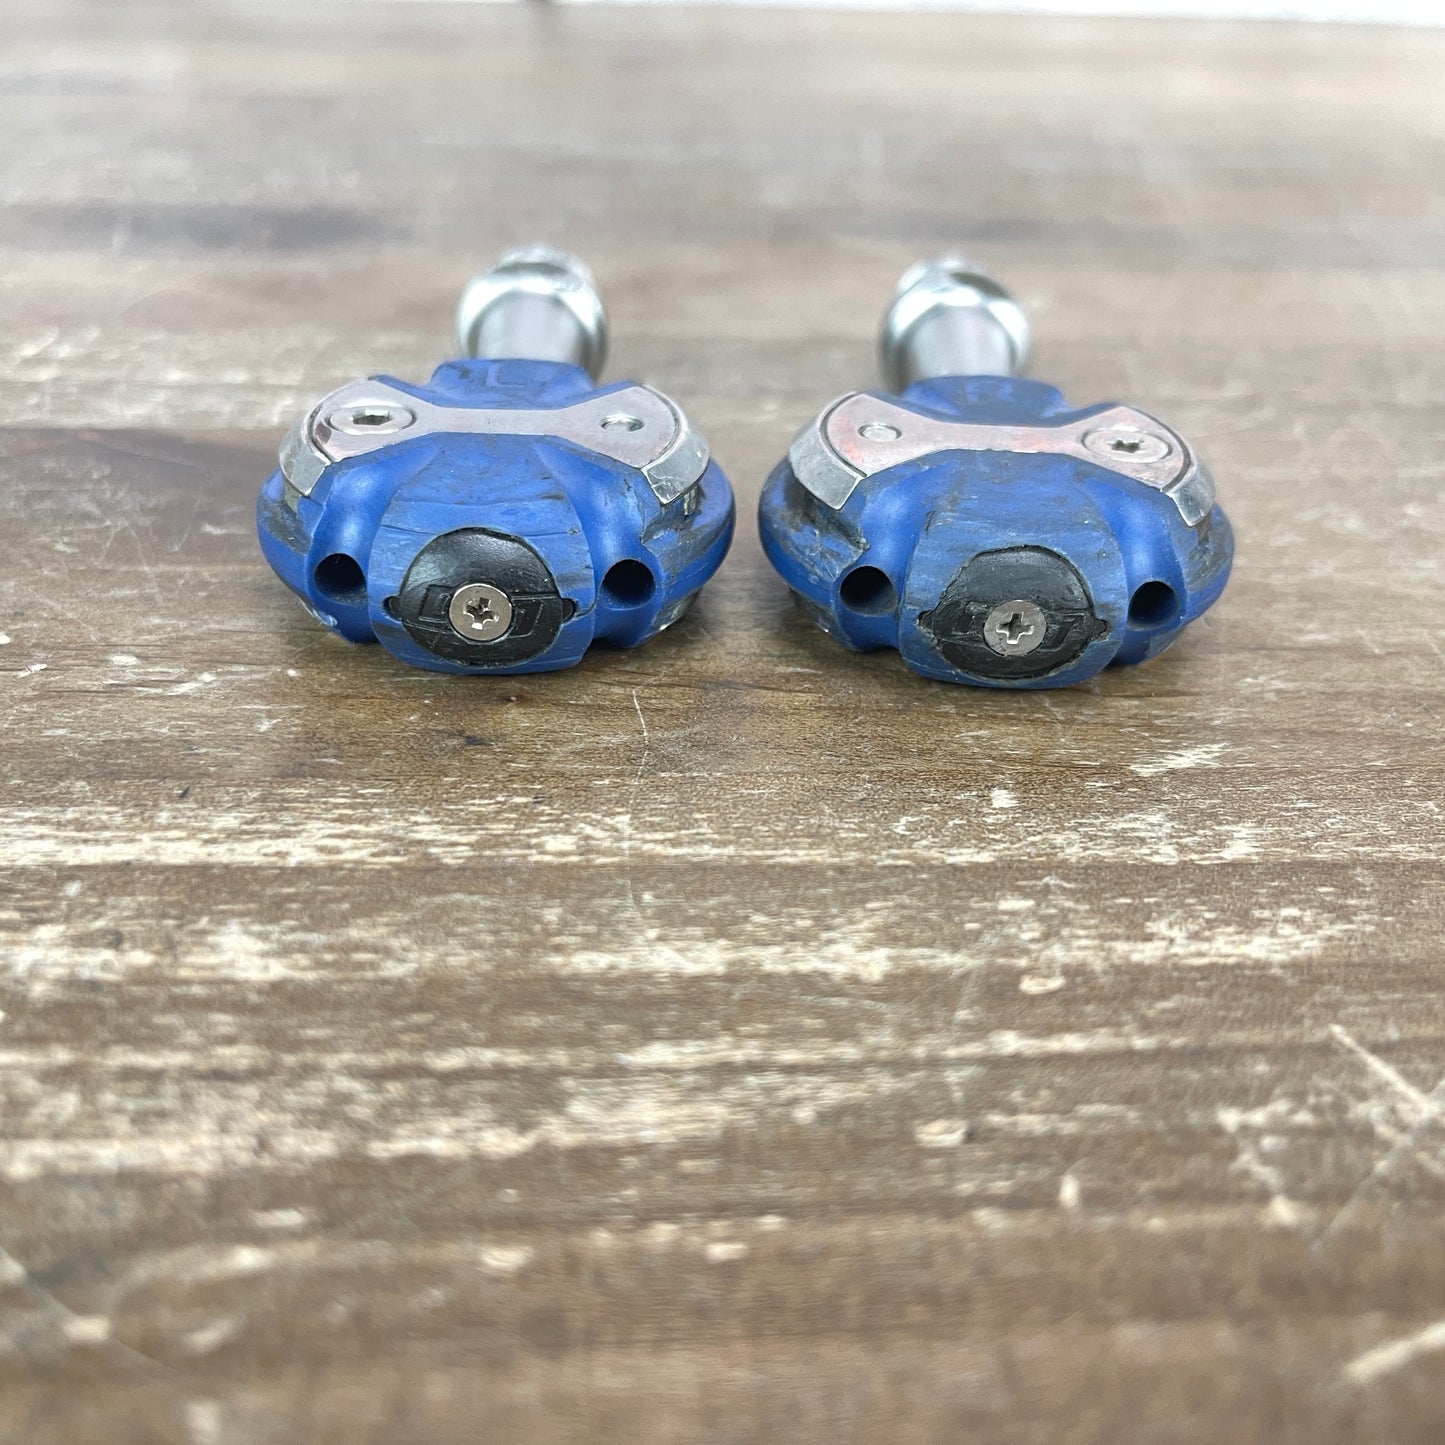 Speedplay Zero Road Bike Pedals Stainless Steel Spindle Blue 206g No Cleats